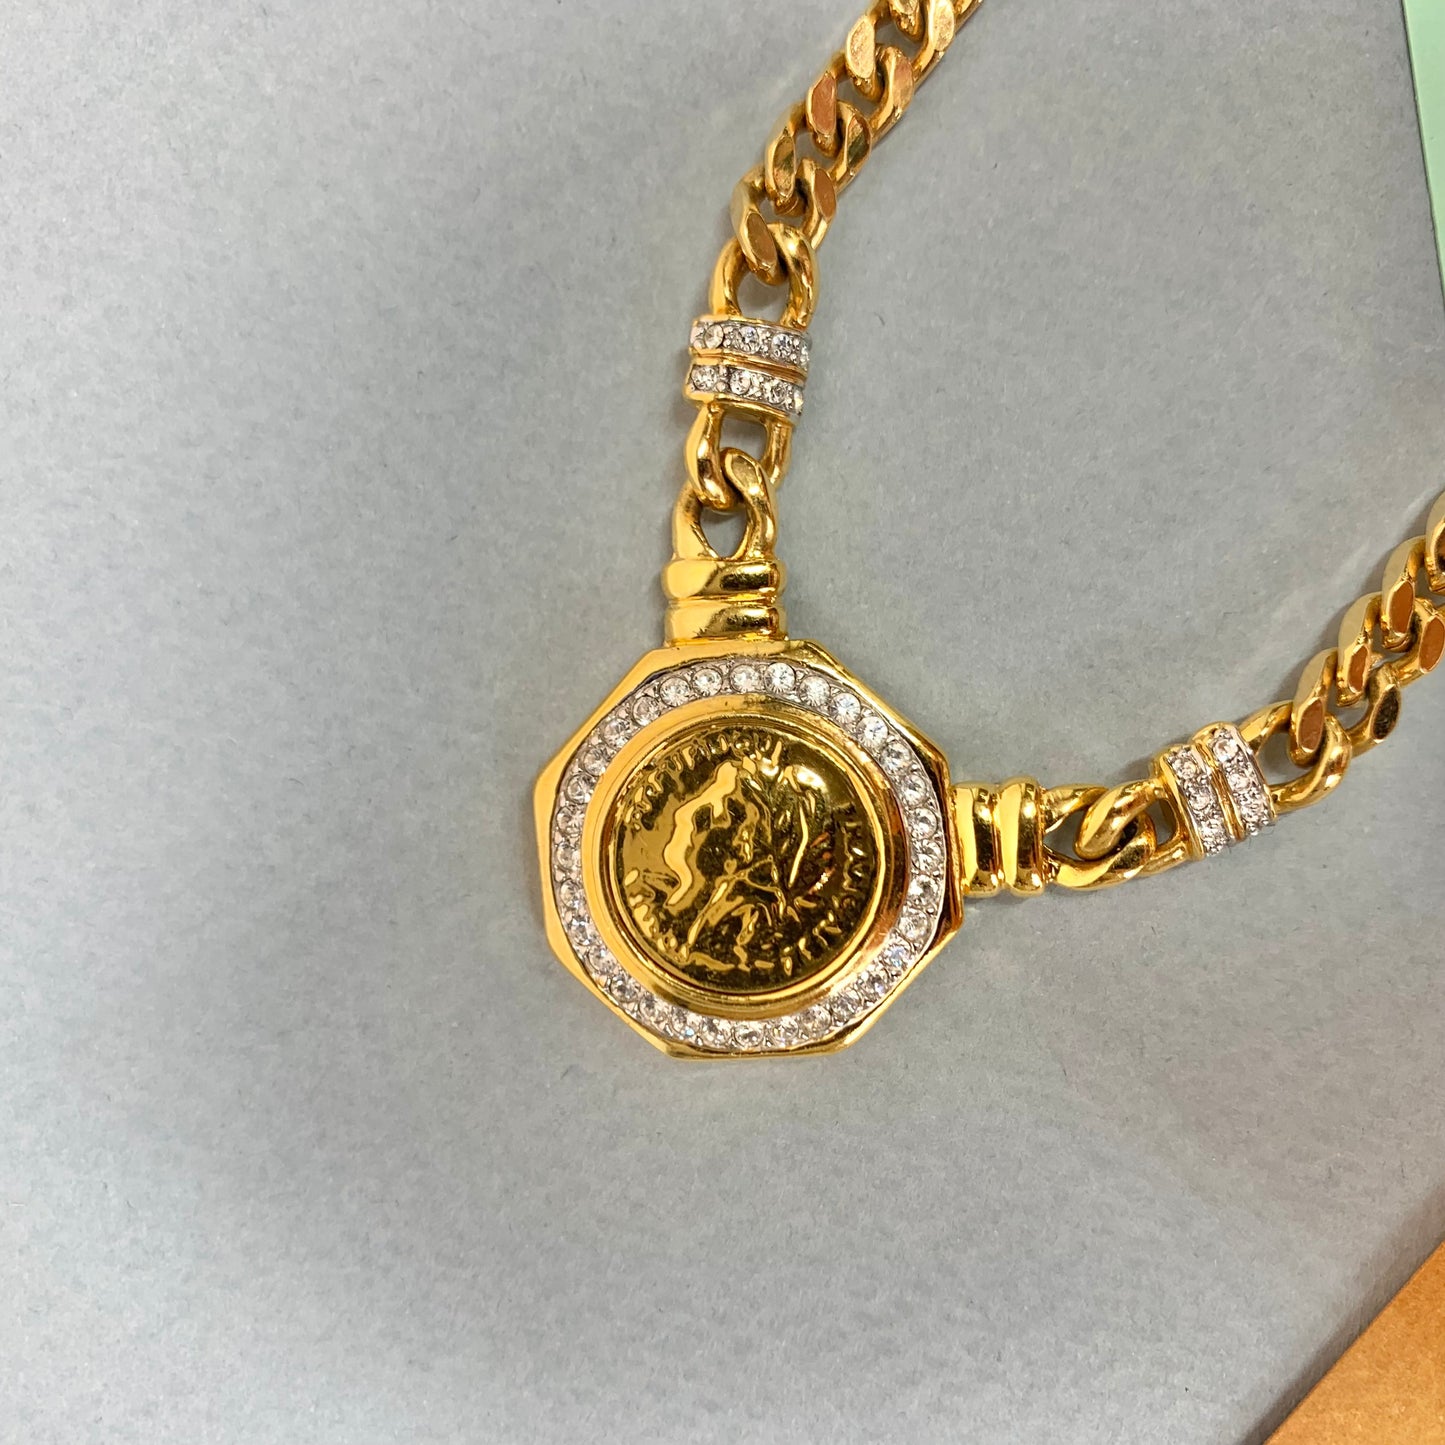 1980s gold plated with Swarovski crystals pendant necklace